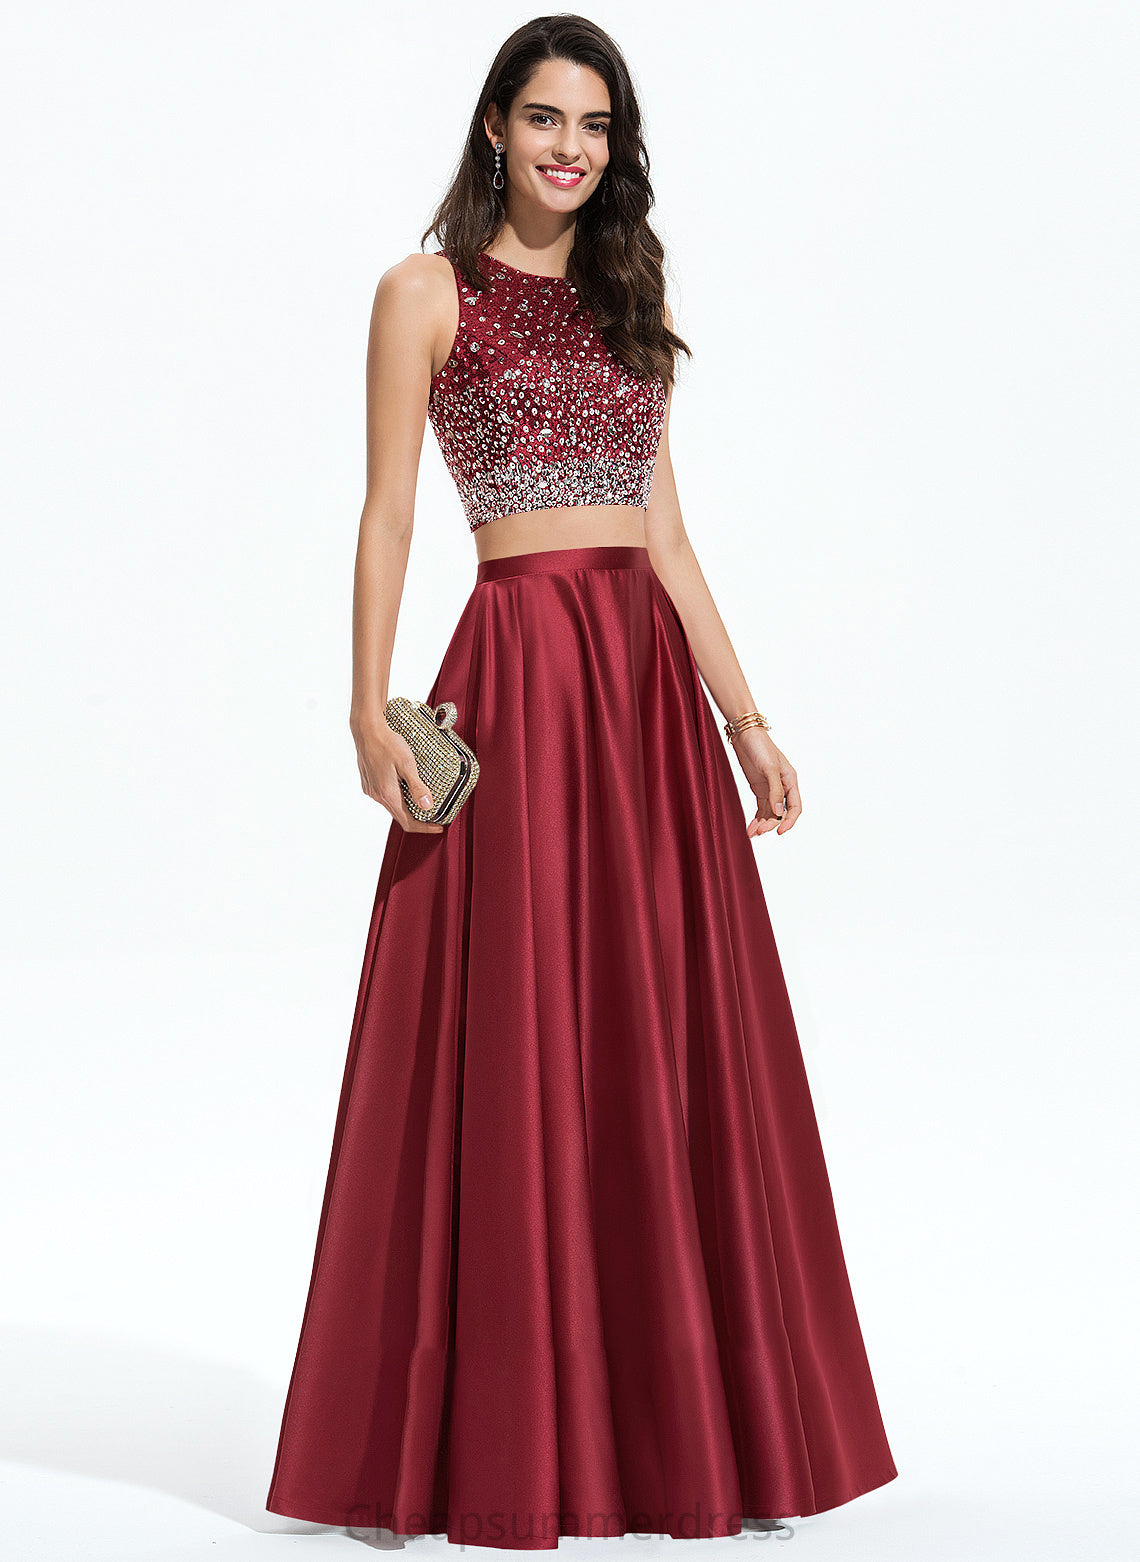 Neck Beading Brielle Prom Dresses Sequins Scoop With A-Line Floor-Length Satin